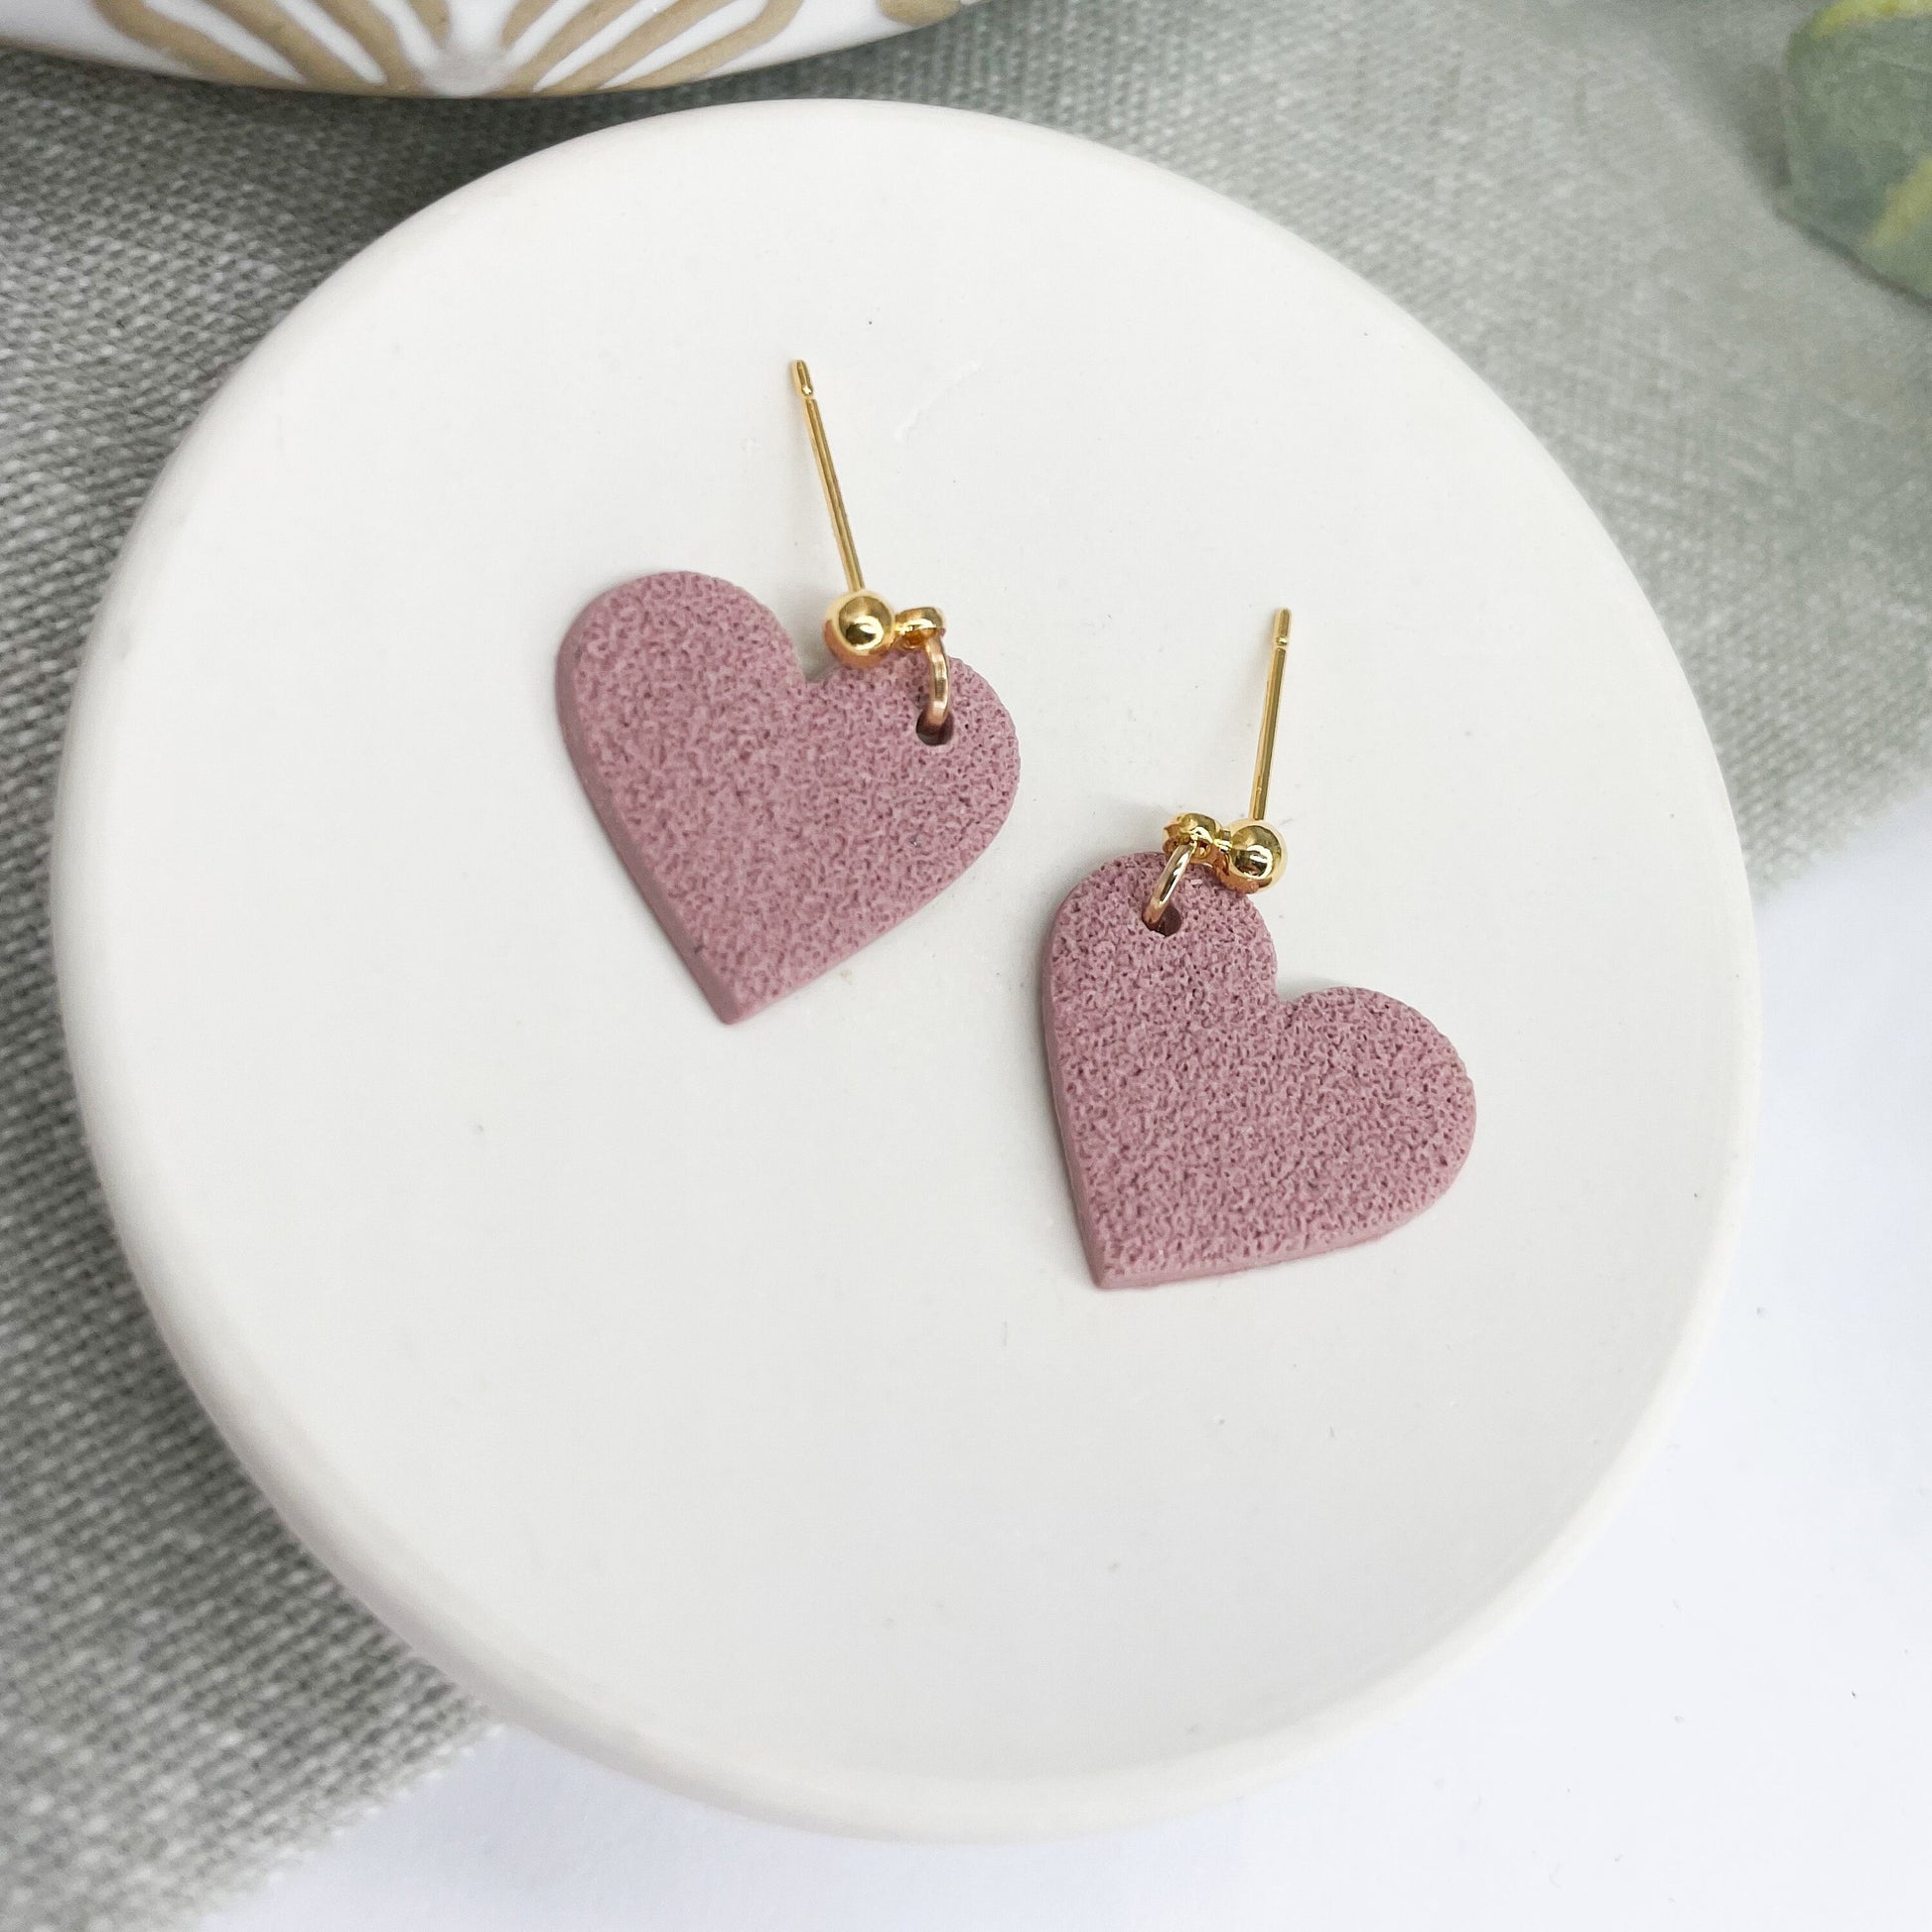 Polymer clay heart earrings, galentine gift, post box gift, best friend birthday gift, valentines girlfriend gift,